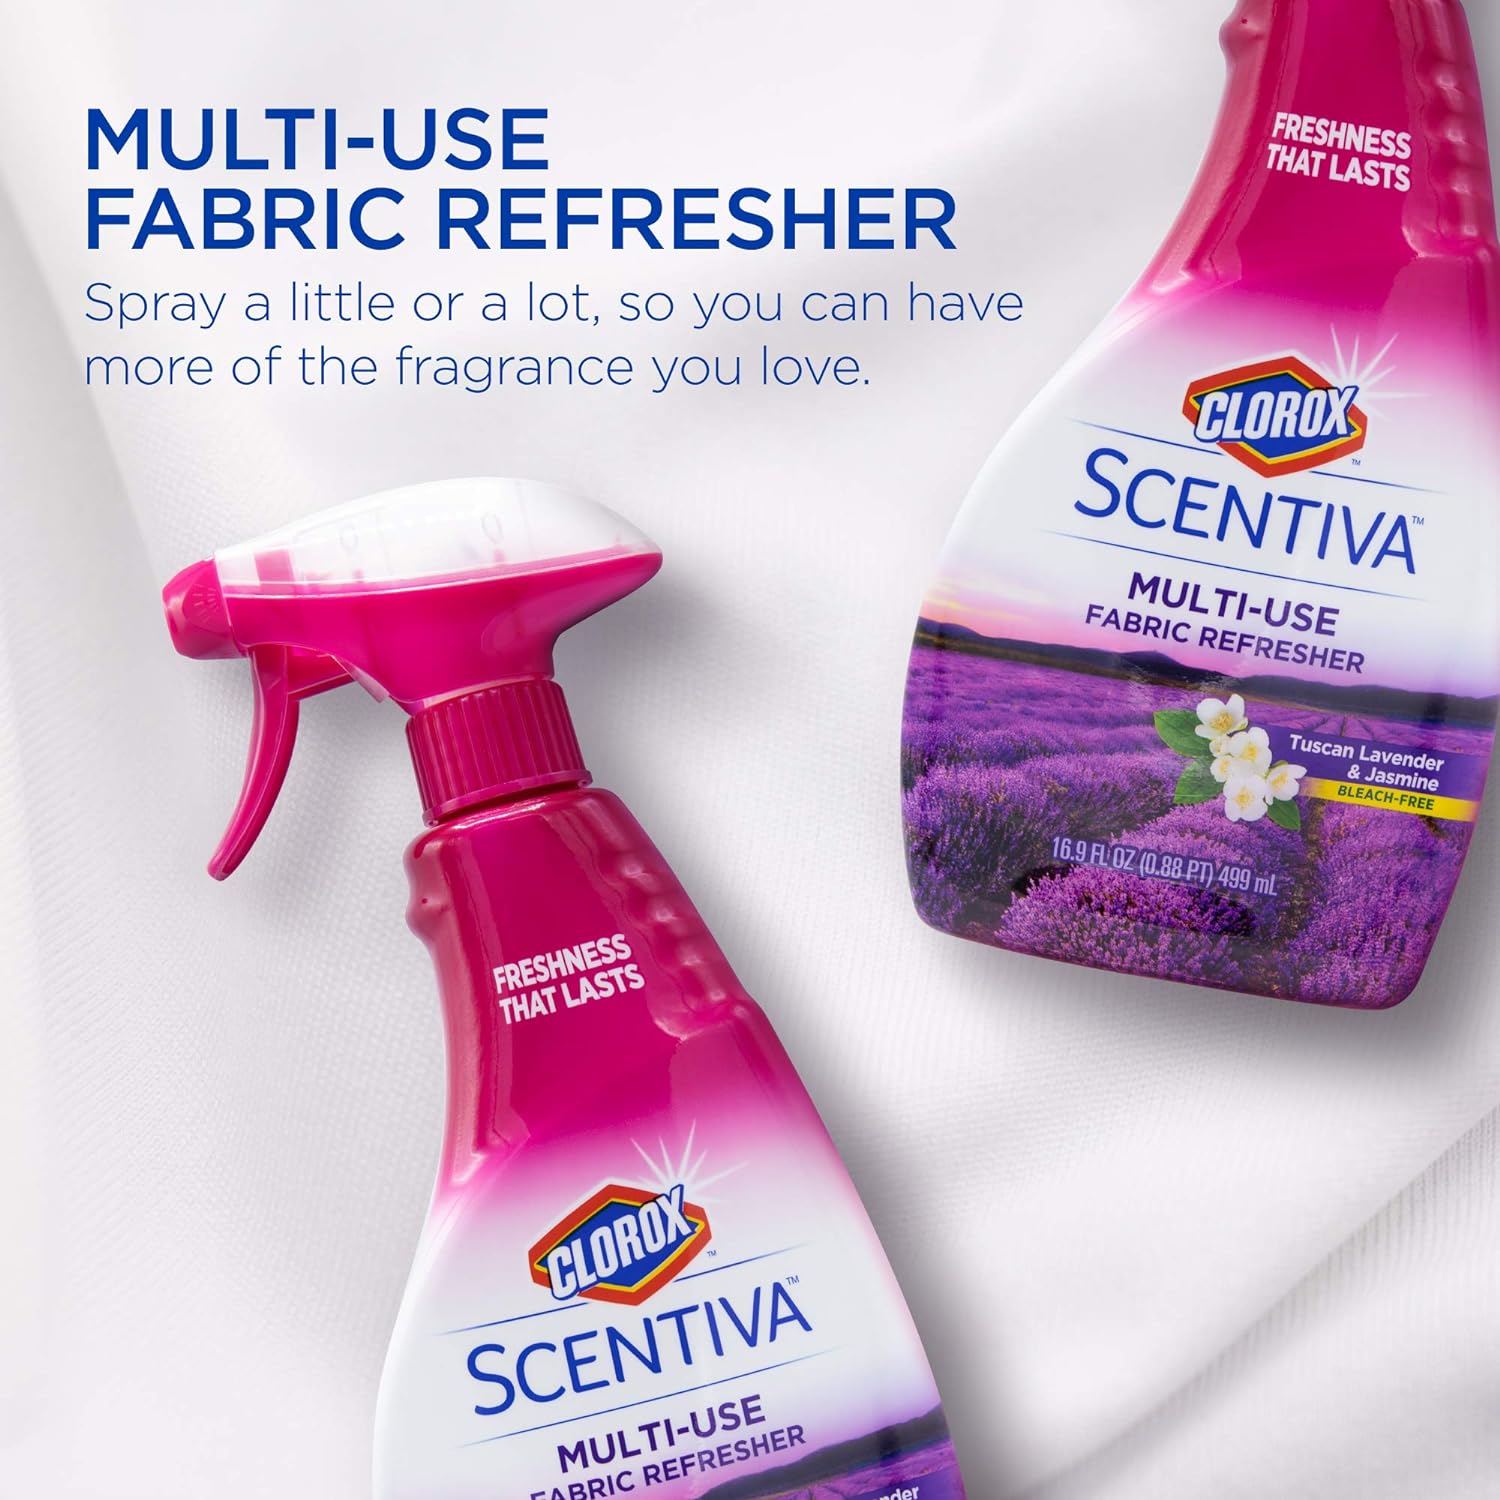 Clorox Scentiva Multi-Use Fabric Refresher Spray | Fabric Freshener for Closets, Upholstery, Curtains, and Carpets | Tuscan Lavender & Jasmine | 16.9 Ounces (Pack of 2) : Health & Household